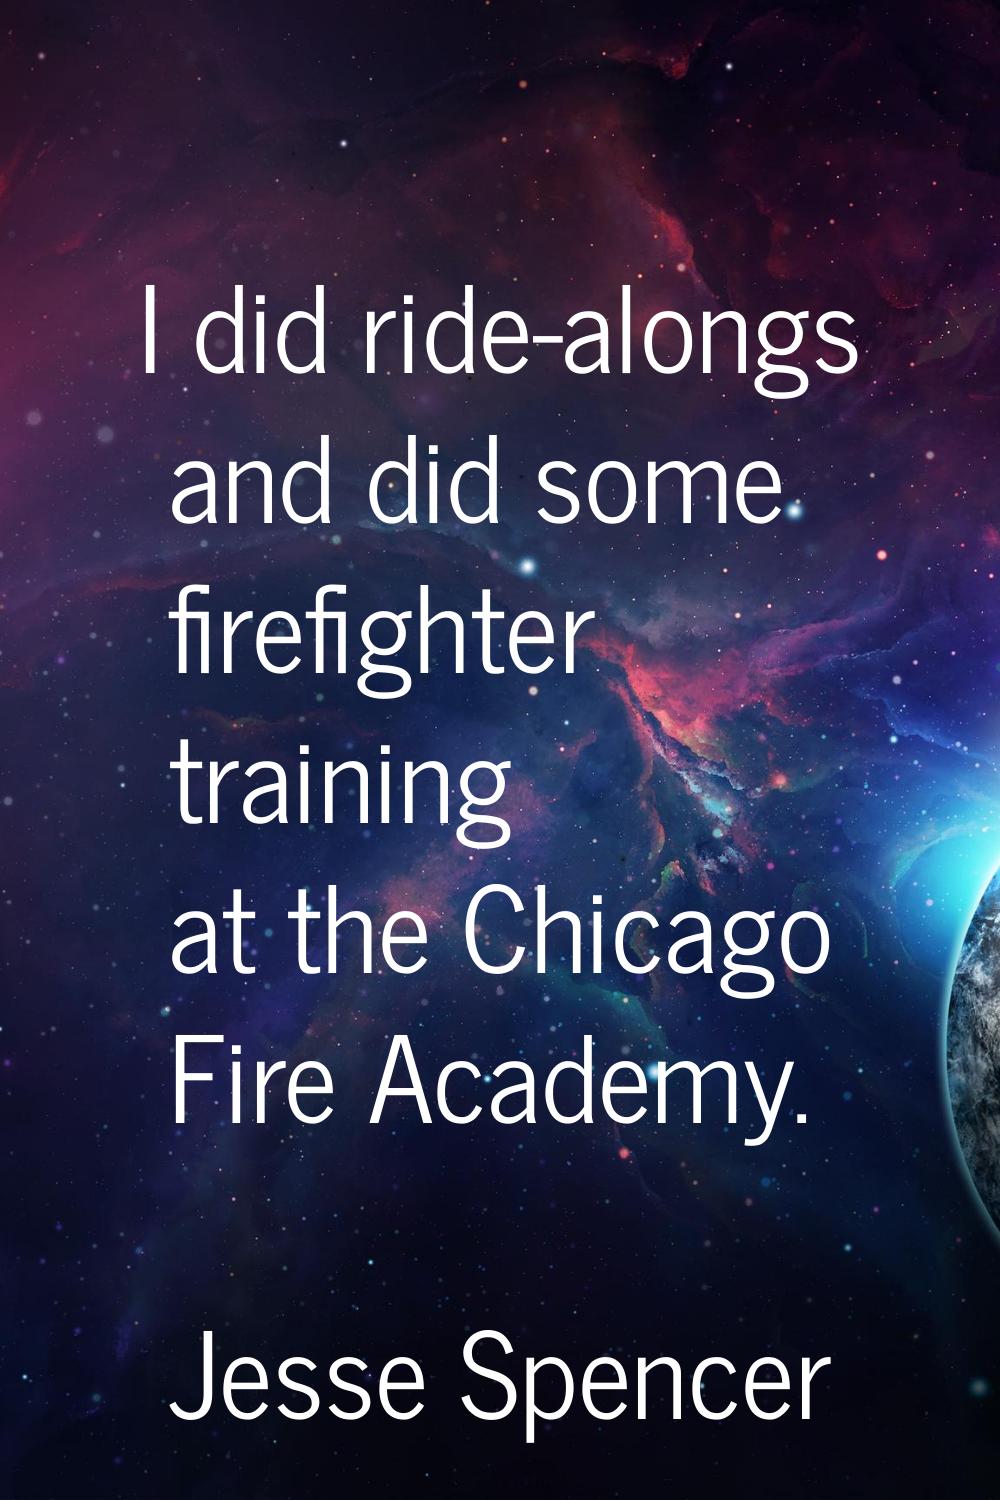 I did ride-alongs and did some firefighter training at the Chicago Fire Academy.